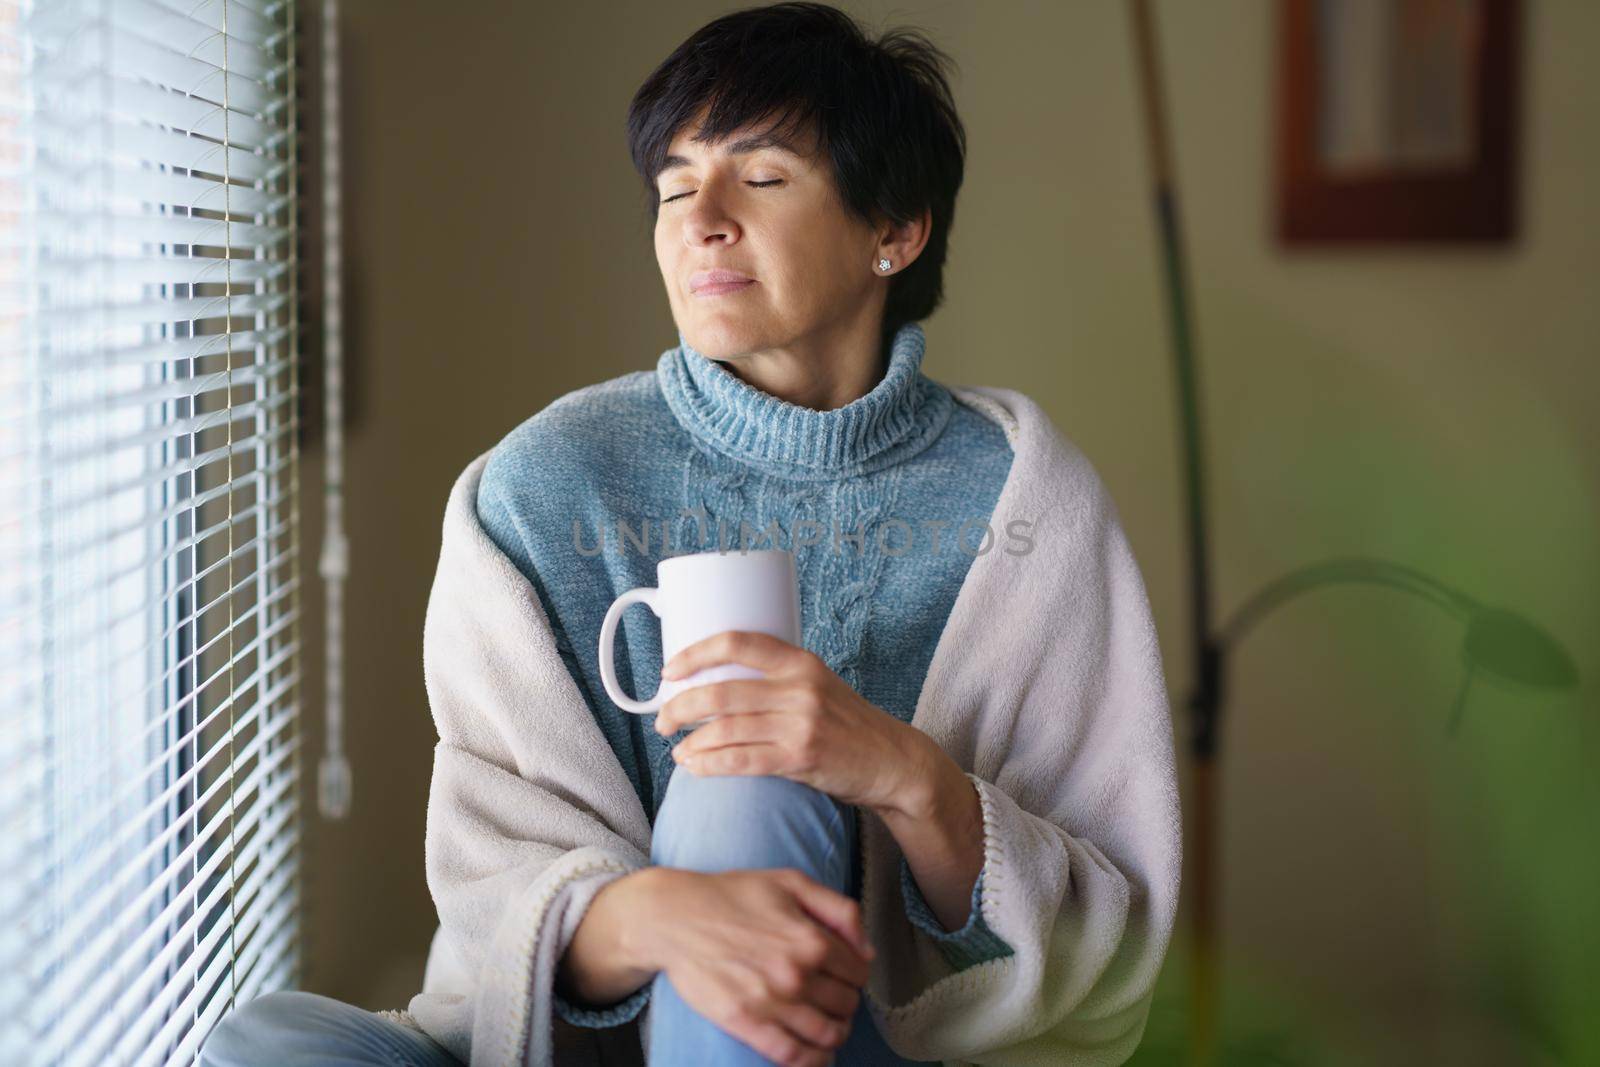 Middle-aged woman with her eyes closed near a window, drinking a mug of coffee. Female in her 50s